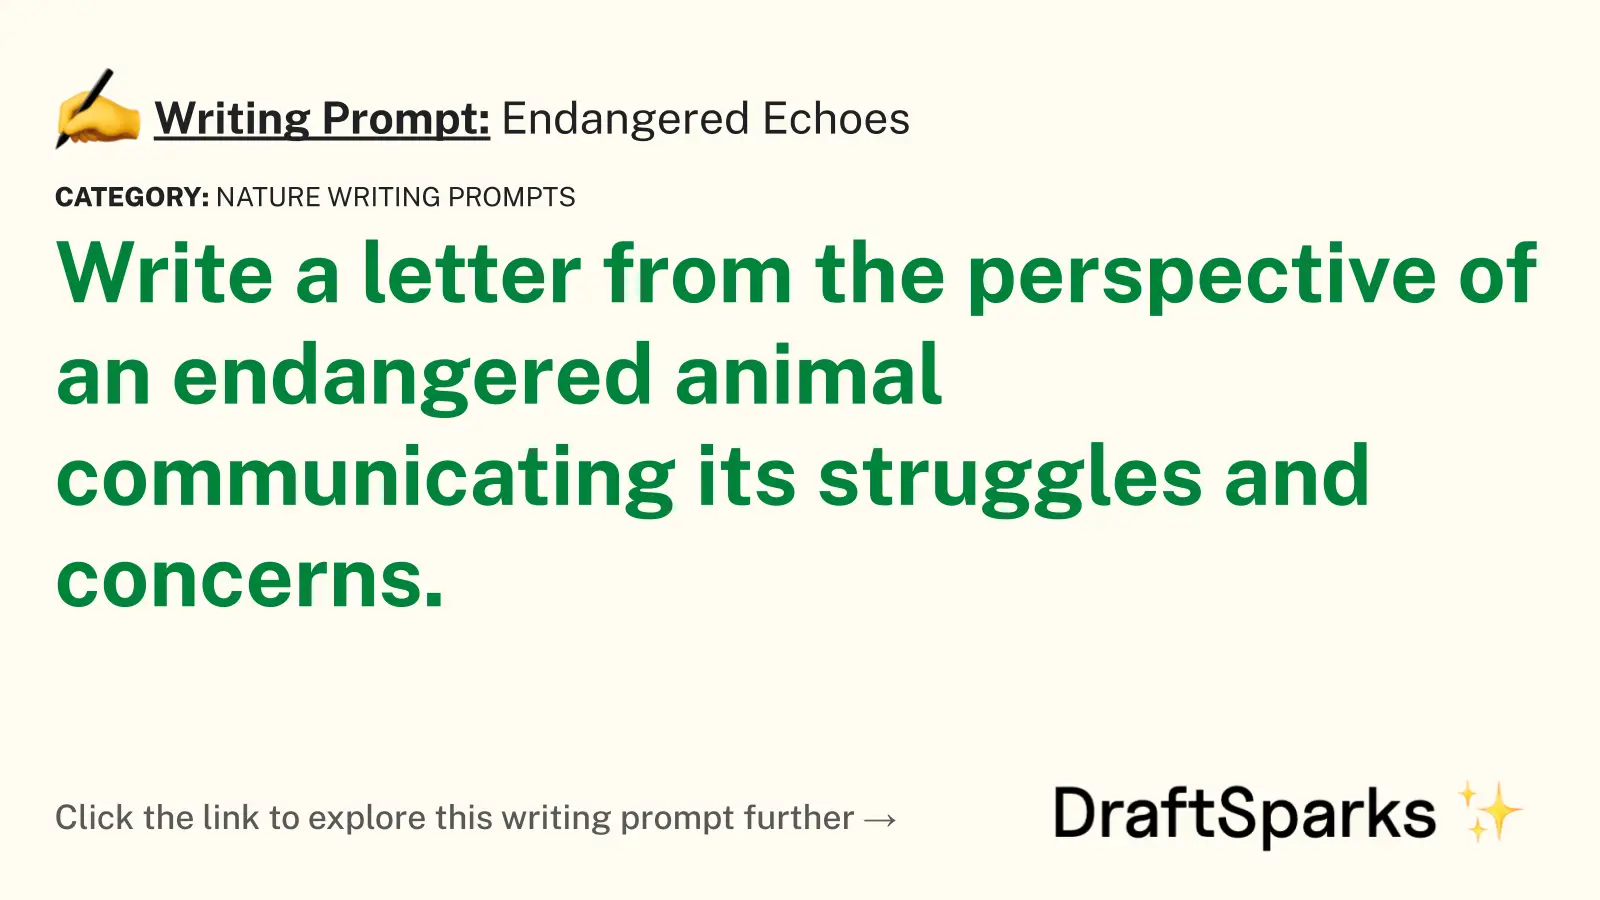 Endangered Echoes